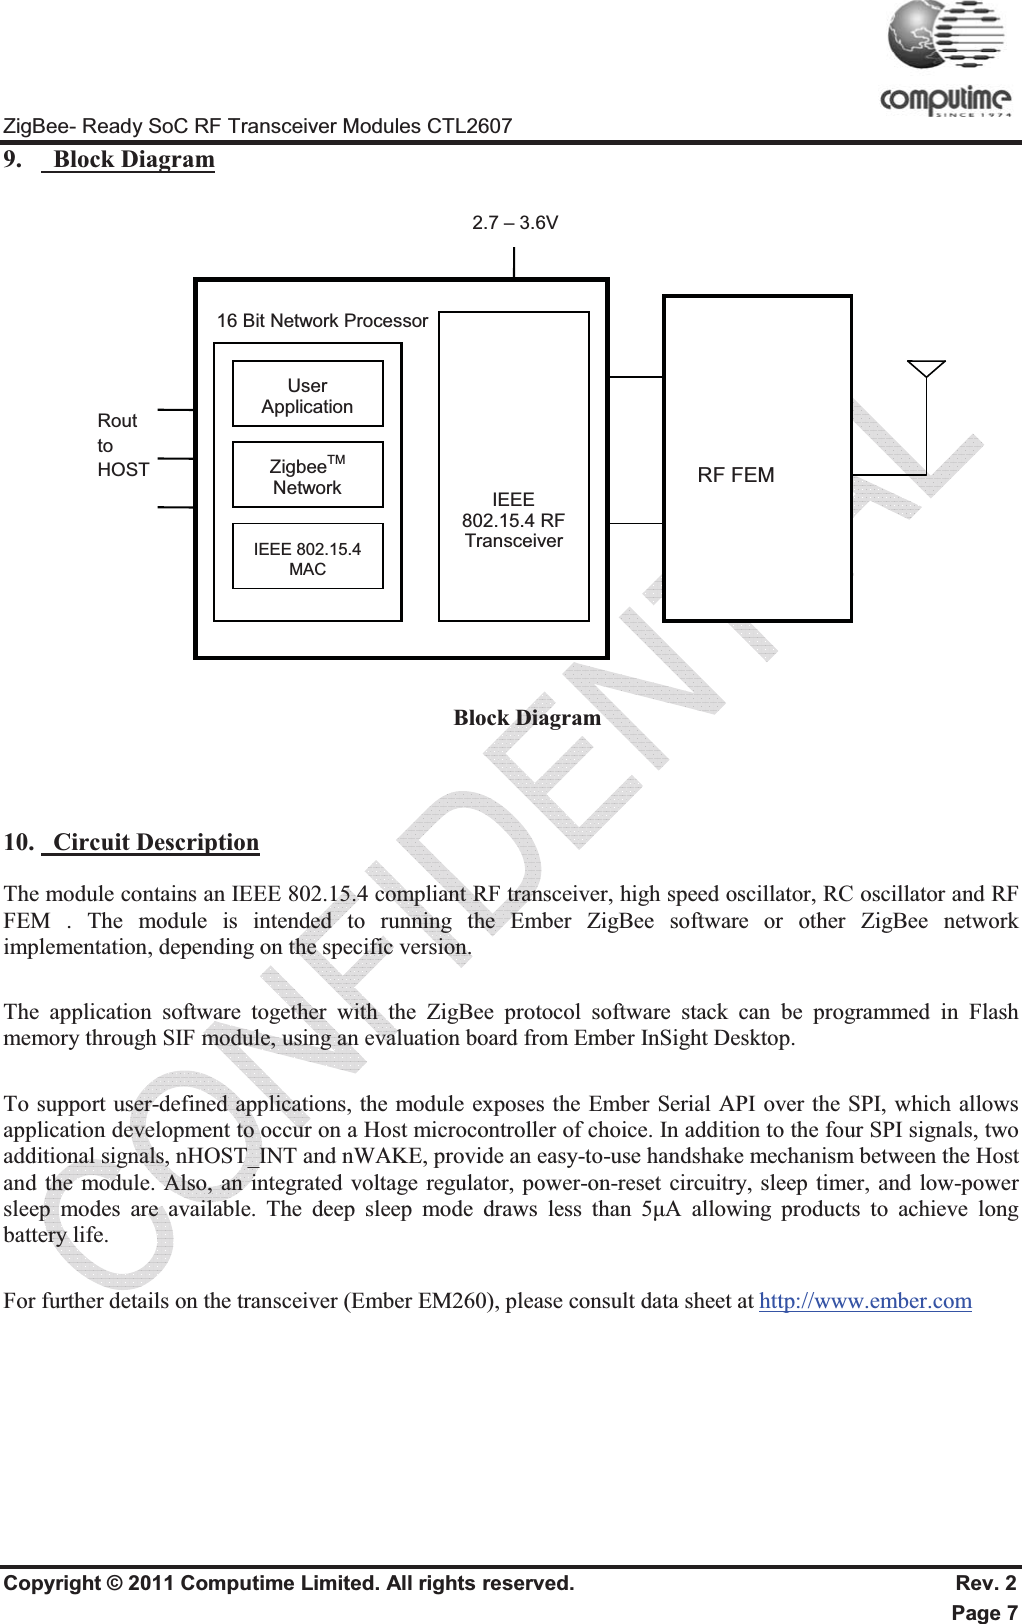 ZigBee- Ready SoC RF Transceiver Modules CTL2607 Copyright © 2011 Computime Limited. All rights reserved.                                                       Rev. 2 Page 7 9.   Block Diagram  Block Diagram 10.   Circuit DescriptionThe module contains an IEEE 802.15.4 compliant RF transceiver, high speed oscillator, RC oscillator and RF FEM . The module is intended to running the Ember ZigBee software or other ZigBee network implementation, depending on the specific version. The application software together with the ZigBee protocol software stack can be programmed in Flash memory through SIF module, using an evaluation board from Ember InSight Desktop. To support user-defined applications, the module exposes the Ember Serial API over the SPI, which allows application development to occur on a Host microcontroller of choice. In addition to the four SPI signals, two additional signals, nHOST_INT and nWAKE, provide an easy-to-use handshake mechanism between the Host and the module. Also, an integrated voltage regulator, power-on-reset circuitry, sleep timer, and low-power sleep modes are available. The deep sleep mode draws less than 5ȝA allowing products to achieve long battery life. For further details on the transceiver (Ember EM260), please consult data sheet at http://www.ember.comRout   to  HOST  16 Bit Network ProcessorUser Application ZigbeeTMNetwork IEEE 802.15.4 MACIEEE 802.15.4 RF Transceiver 2.7 – 3.6V RF FEM 